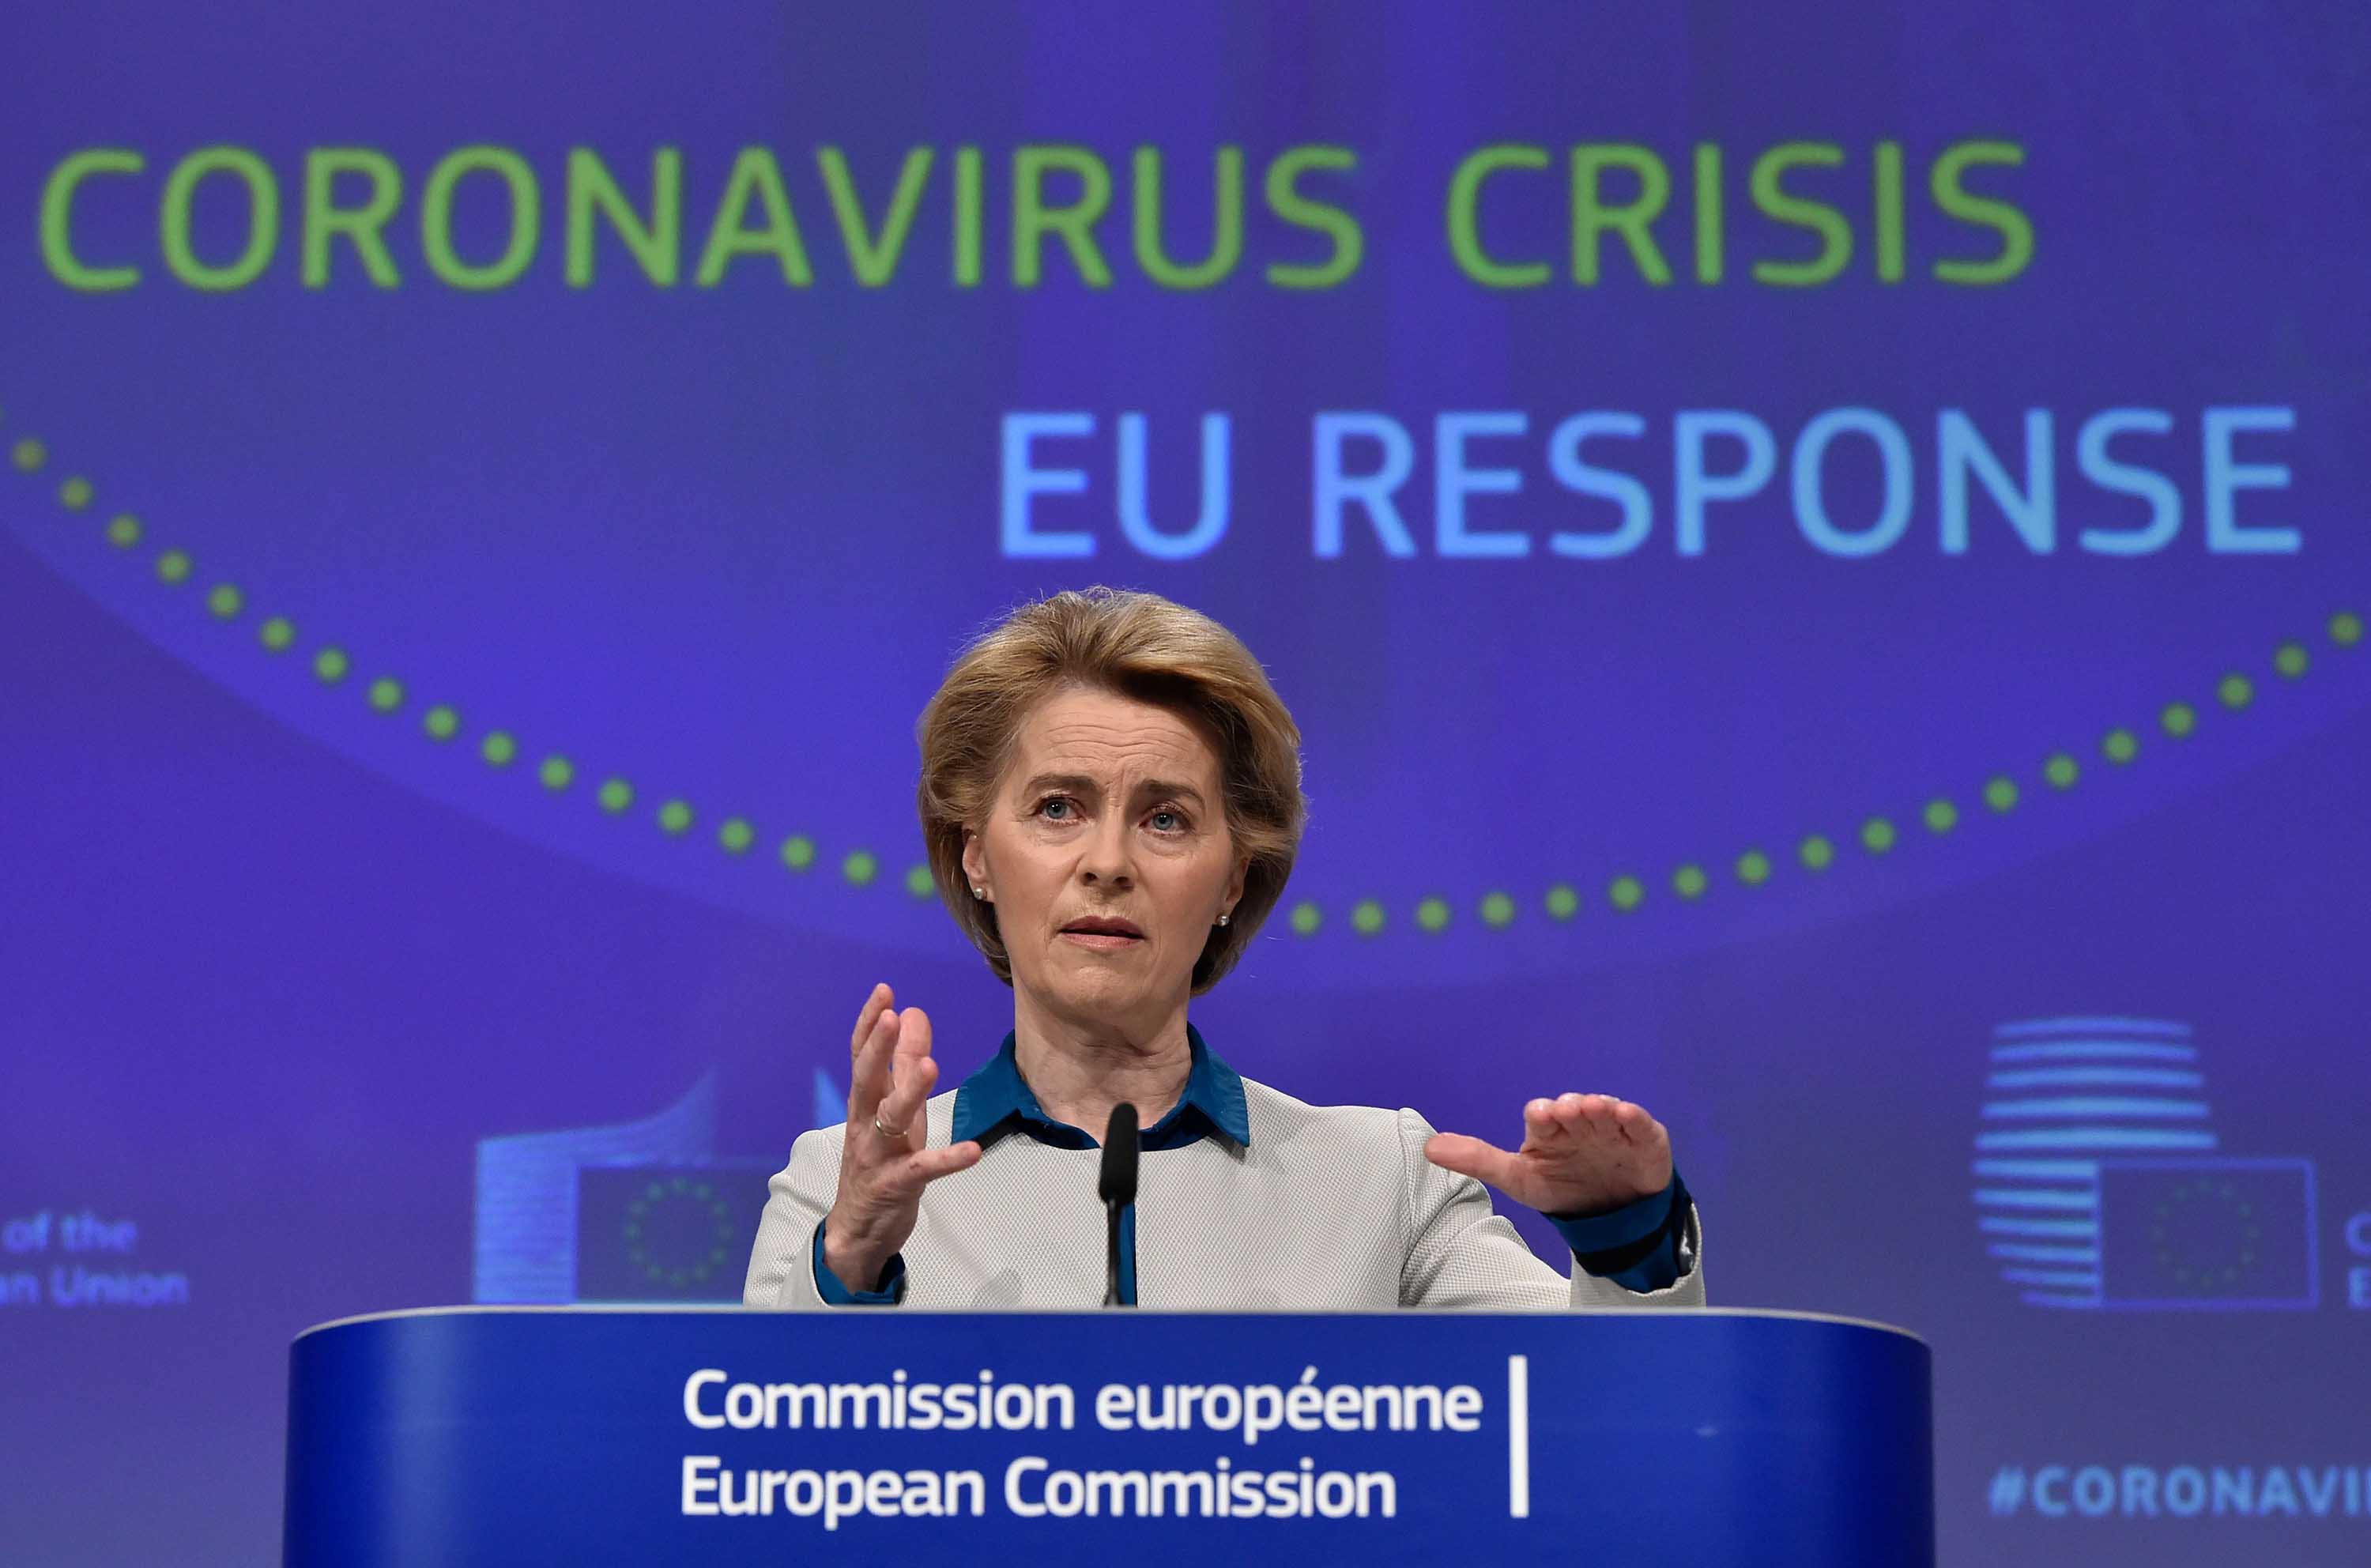 The President of European Commission Ursula von der Leyen holds a press conference at the European Union headquarters in Brussels, Belgium, on April 15.